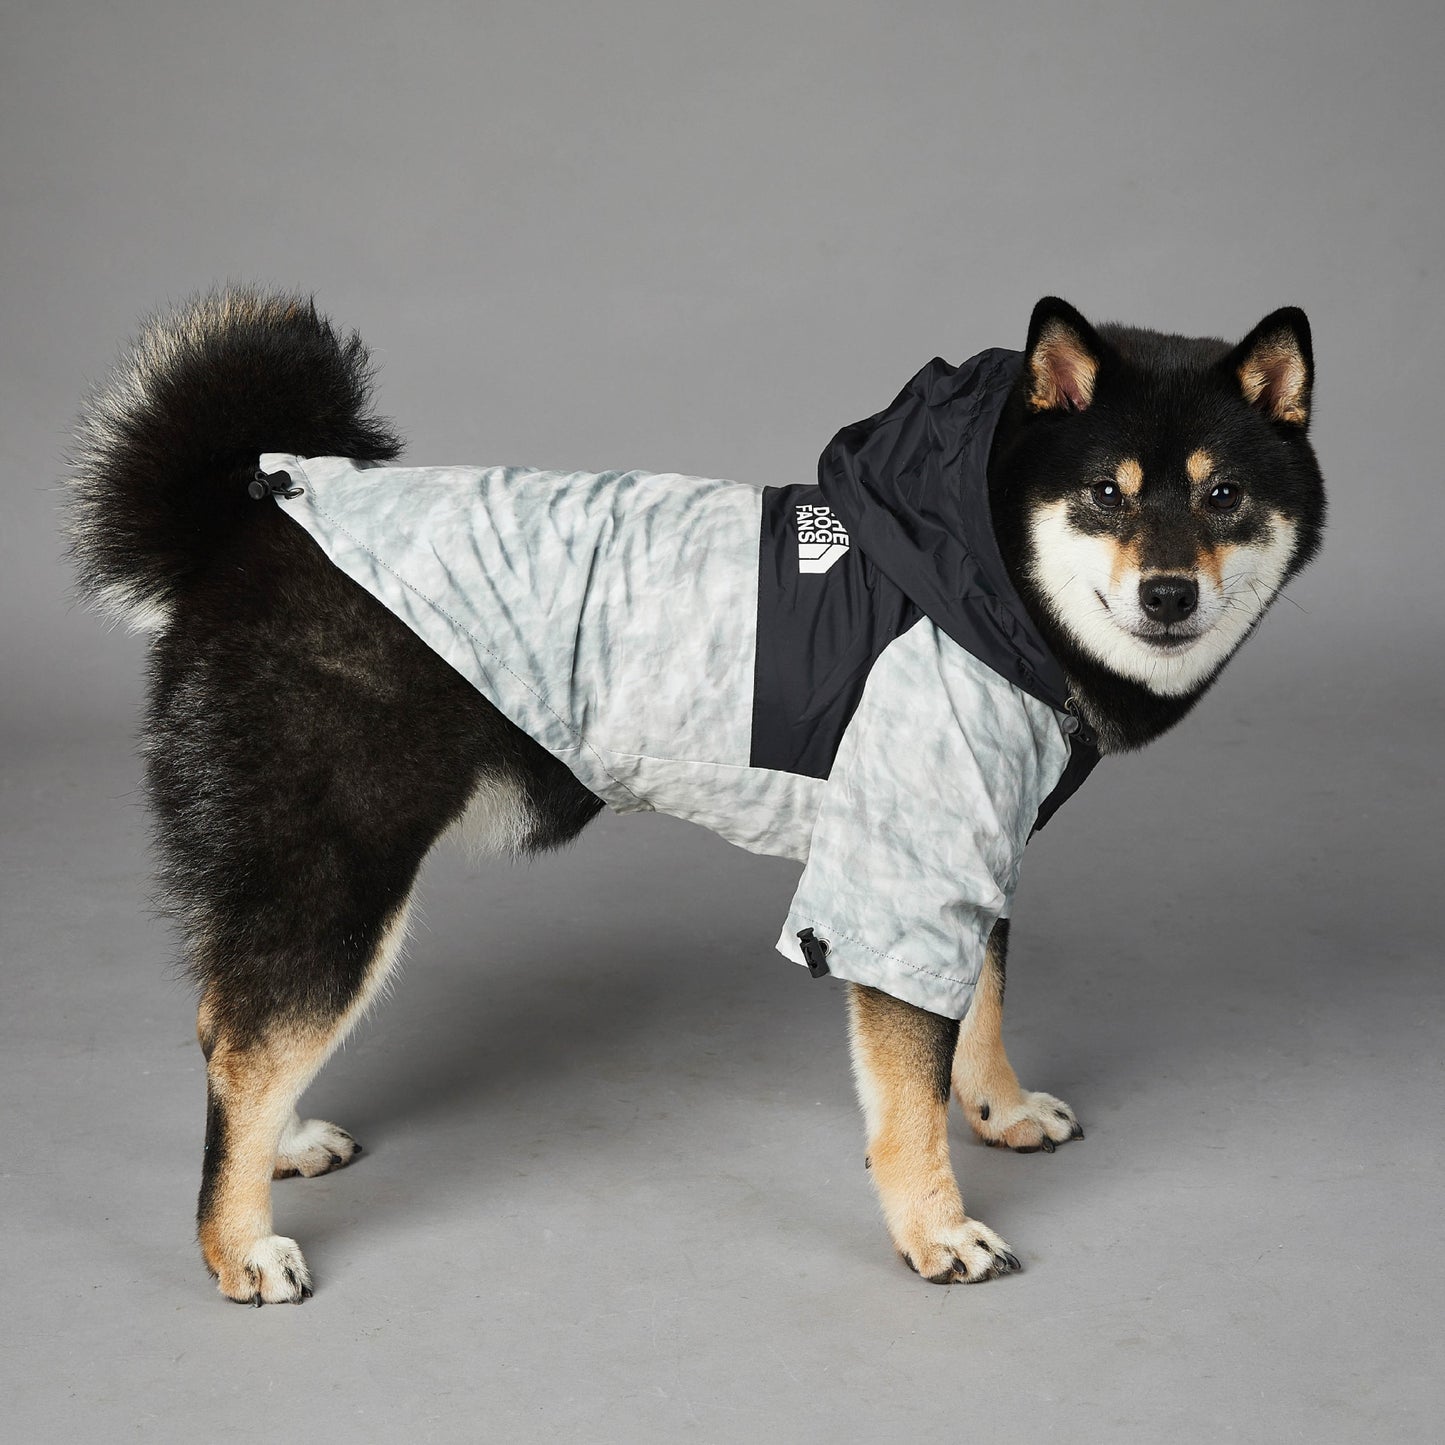 The Dog Face Windproof and Rainproof New Dog Large Dog Raincoat in the North, Dog Pet Cool Jacket